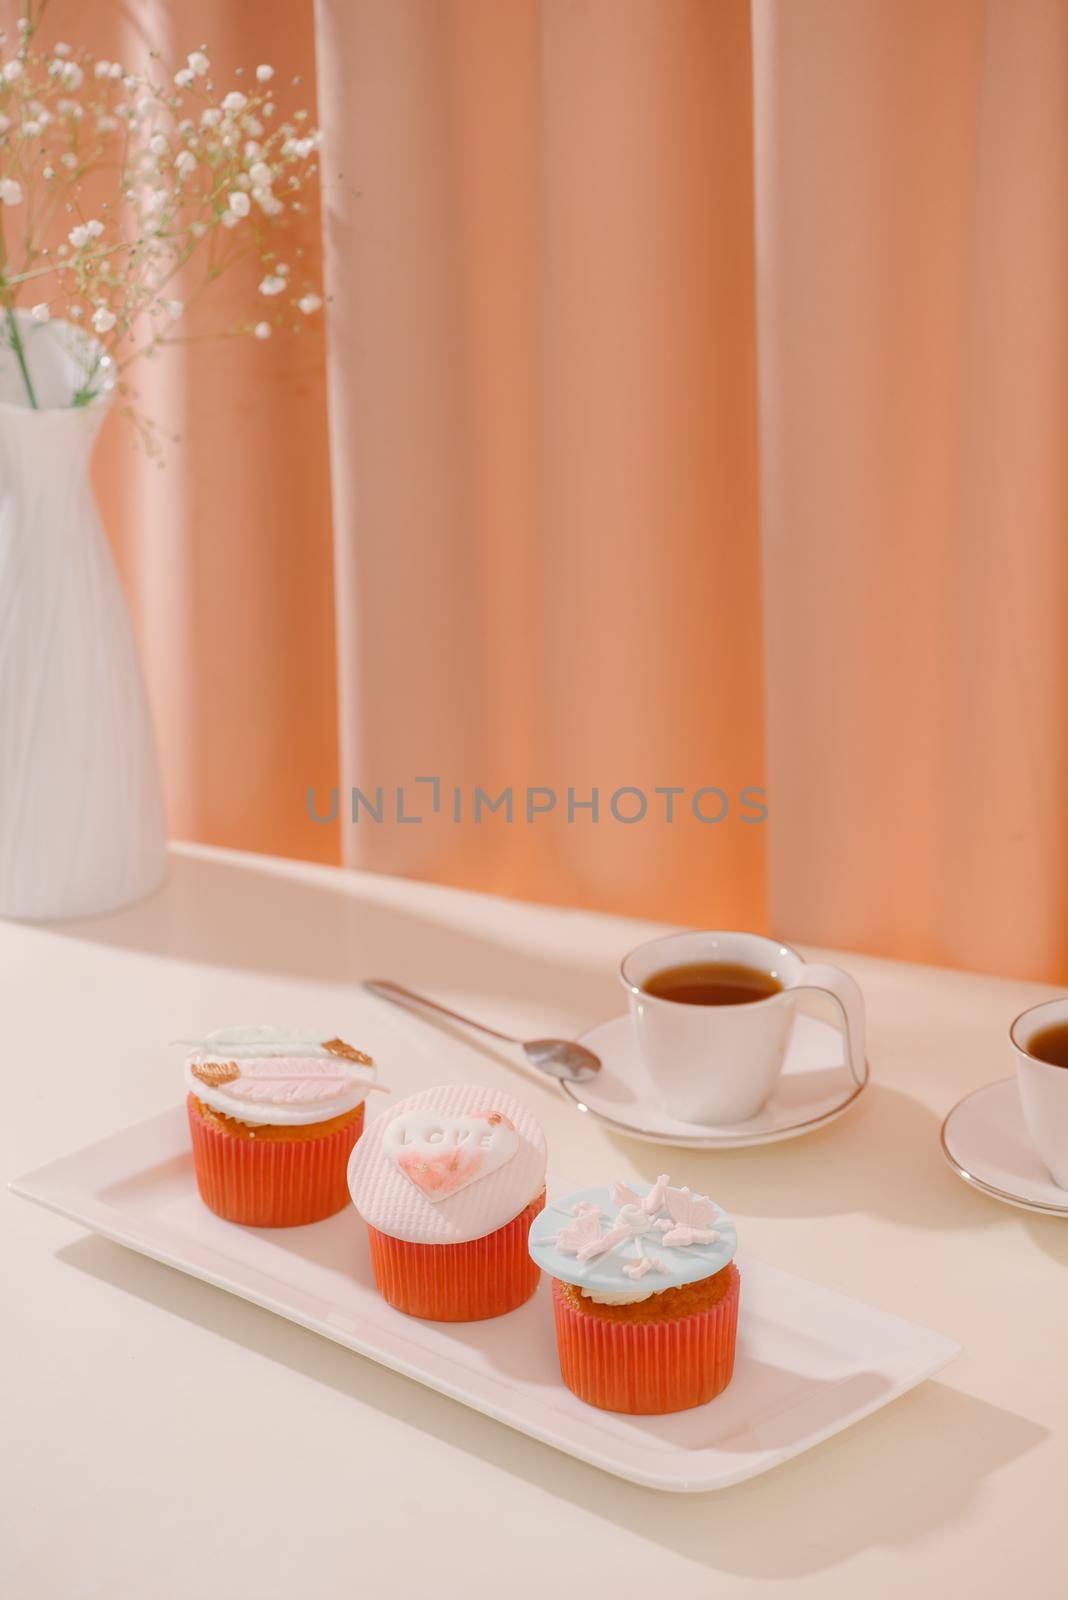 Cupcakes decorated with fondant. Valentine sweet love cupcake on table on light background